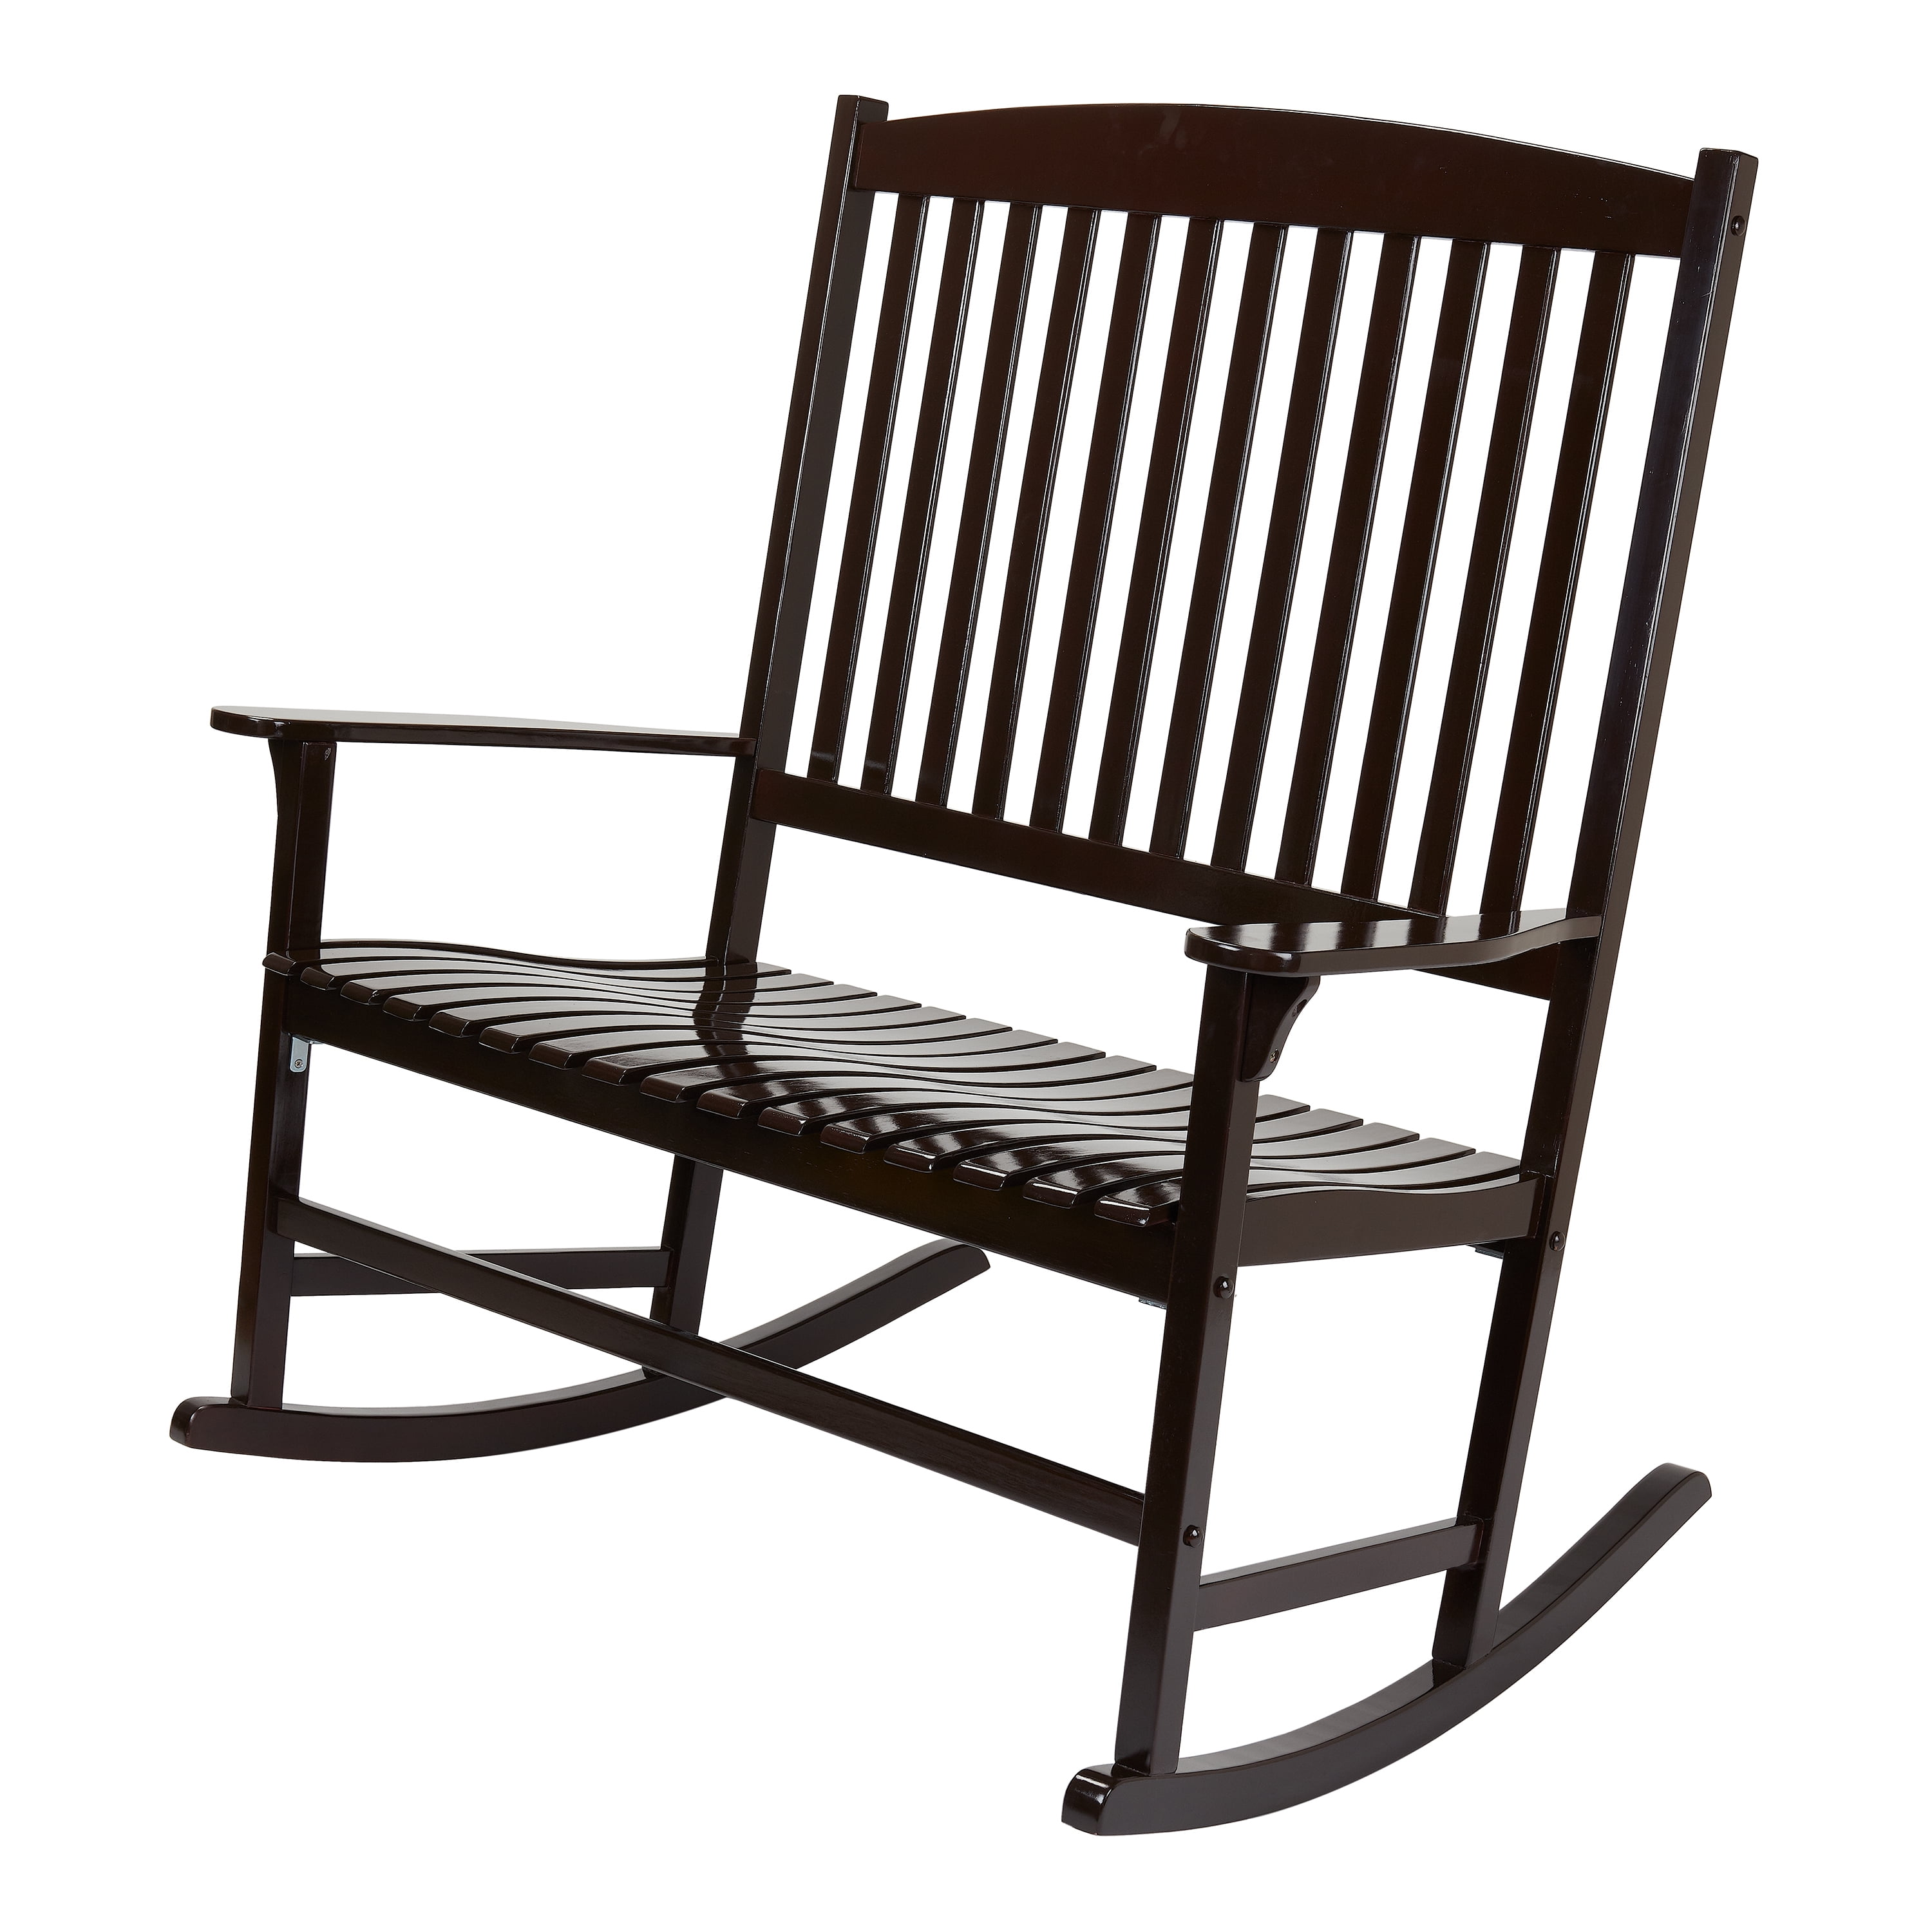 Mainstays Double Wood Outdoor Rocker, Mainstays Black Solid Wood Slat Outdoor Rocking Chair